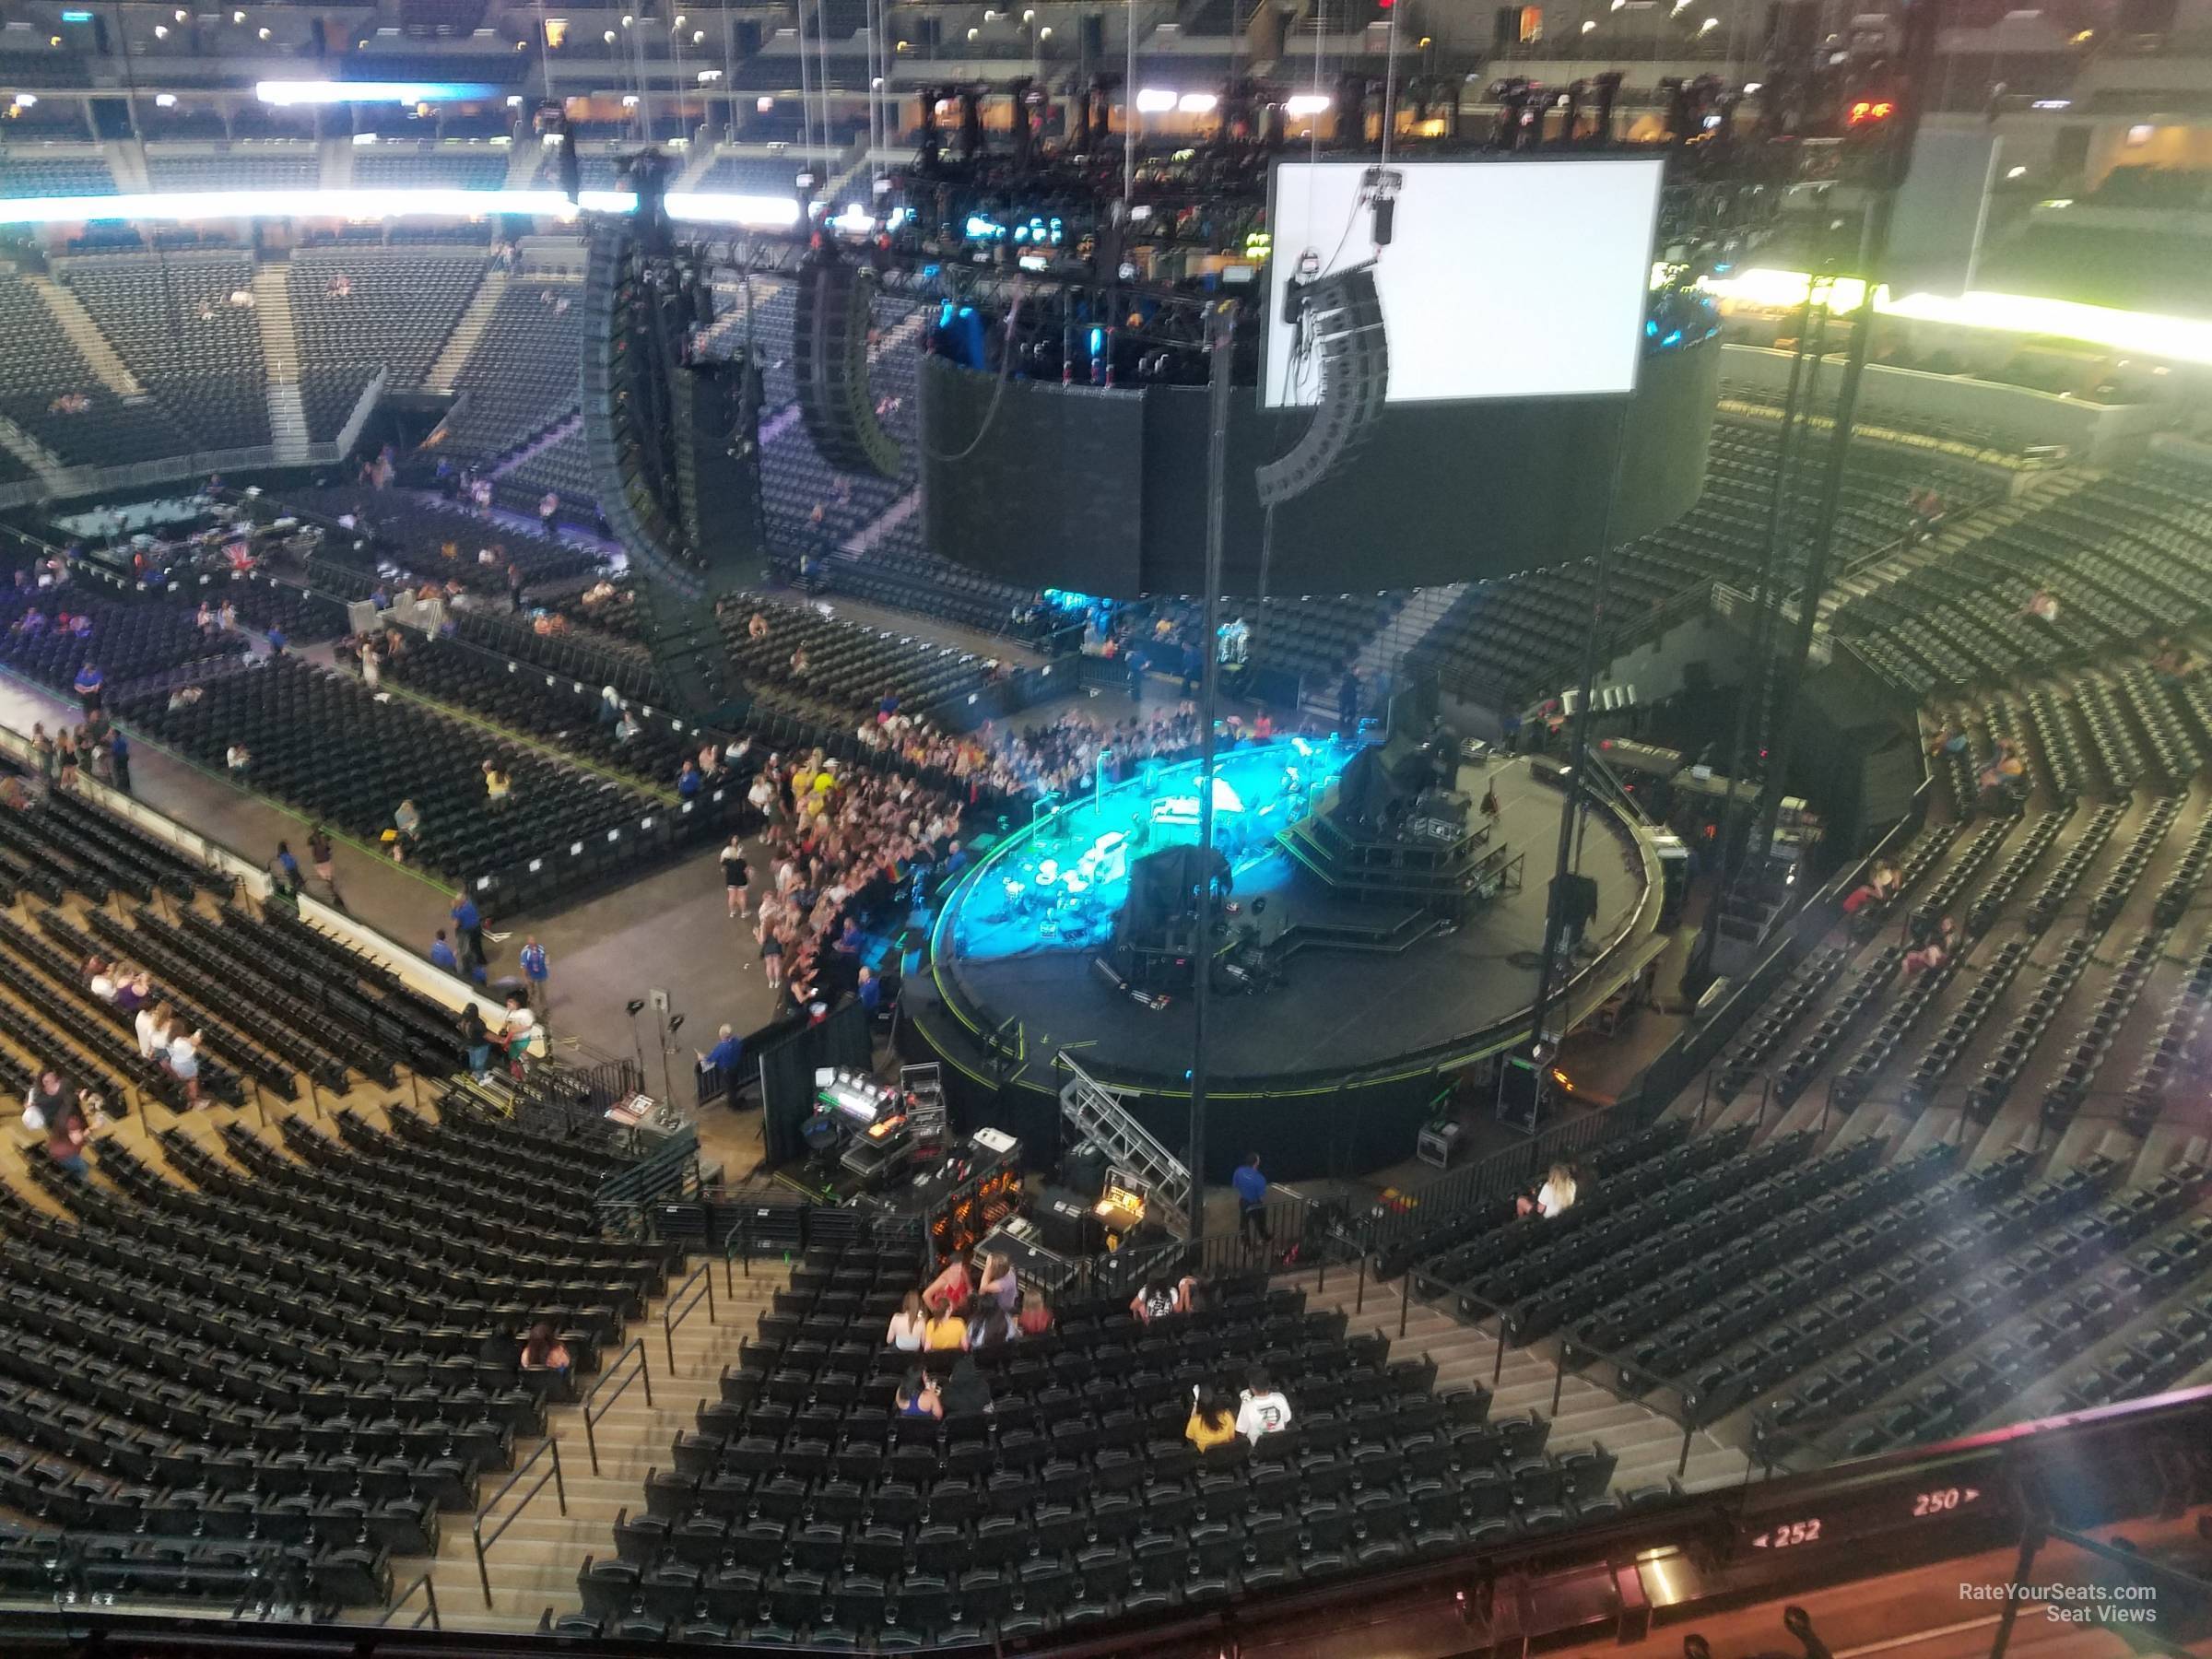 section 369, row 3 seat view  for concert - ball arena